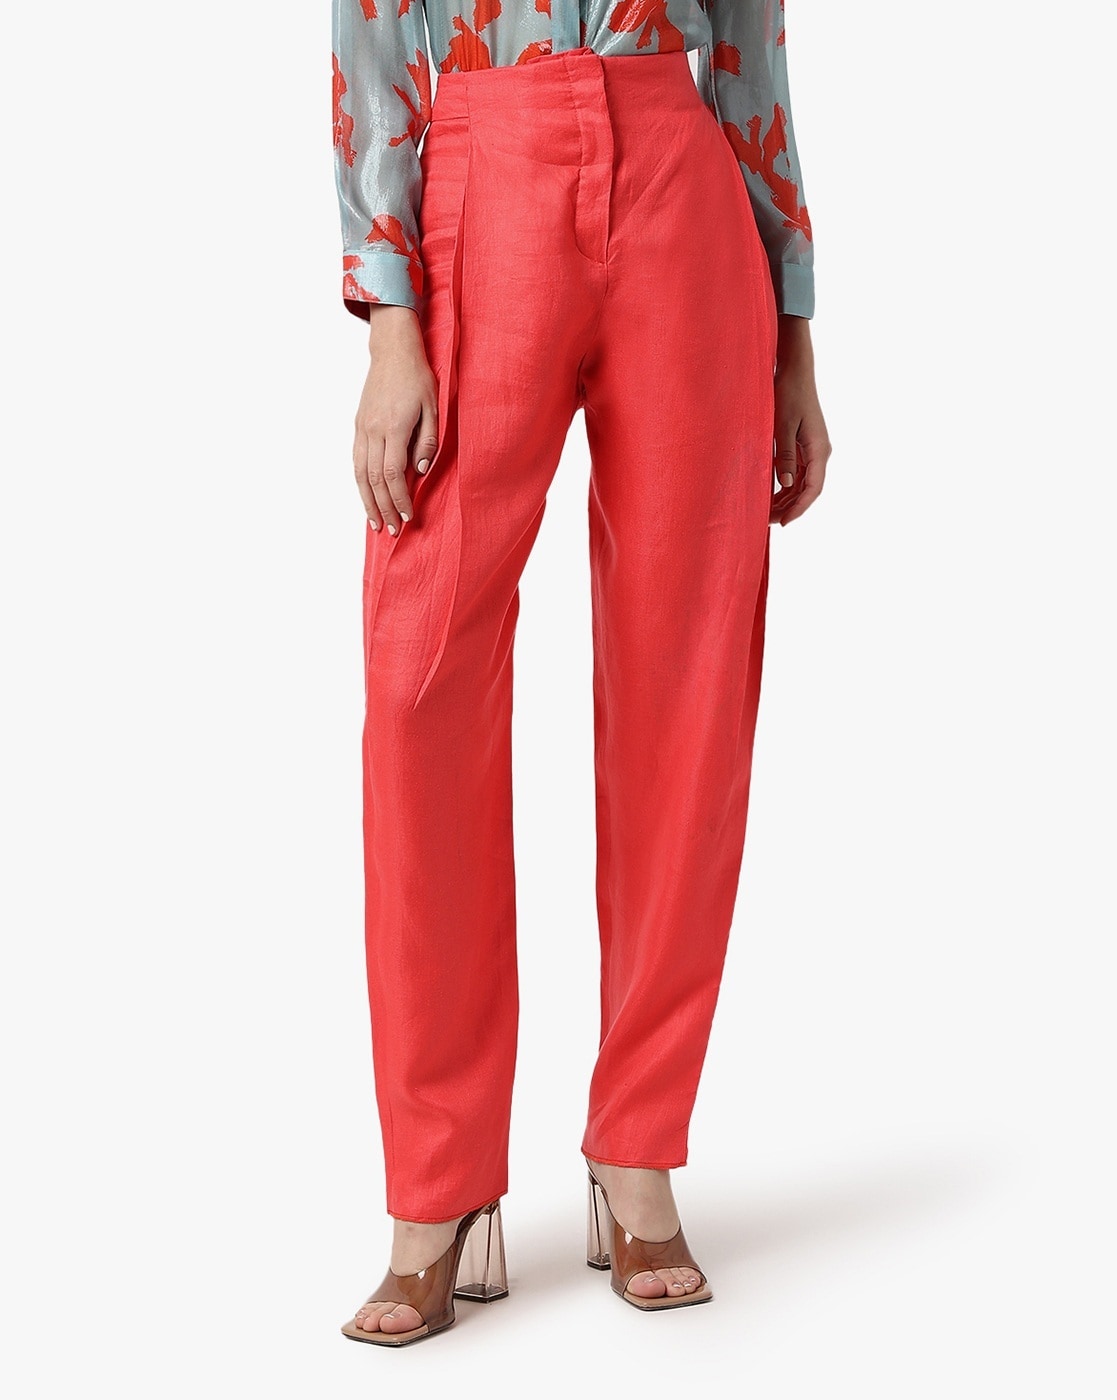 Red Solid Cotton Narrow Pants